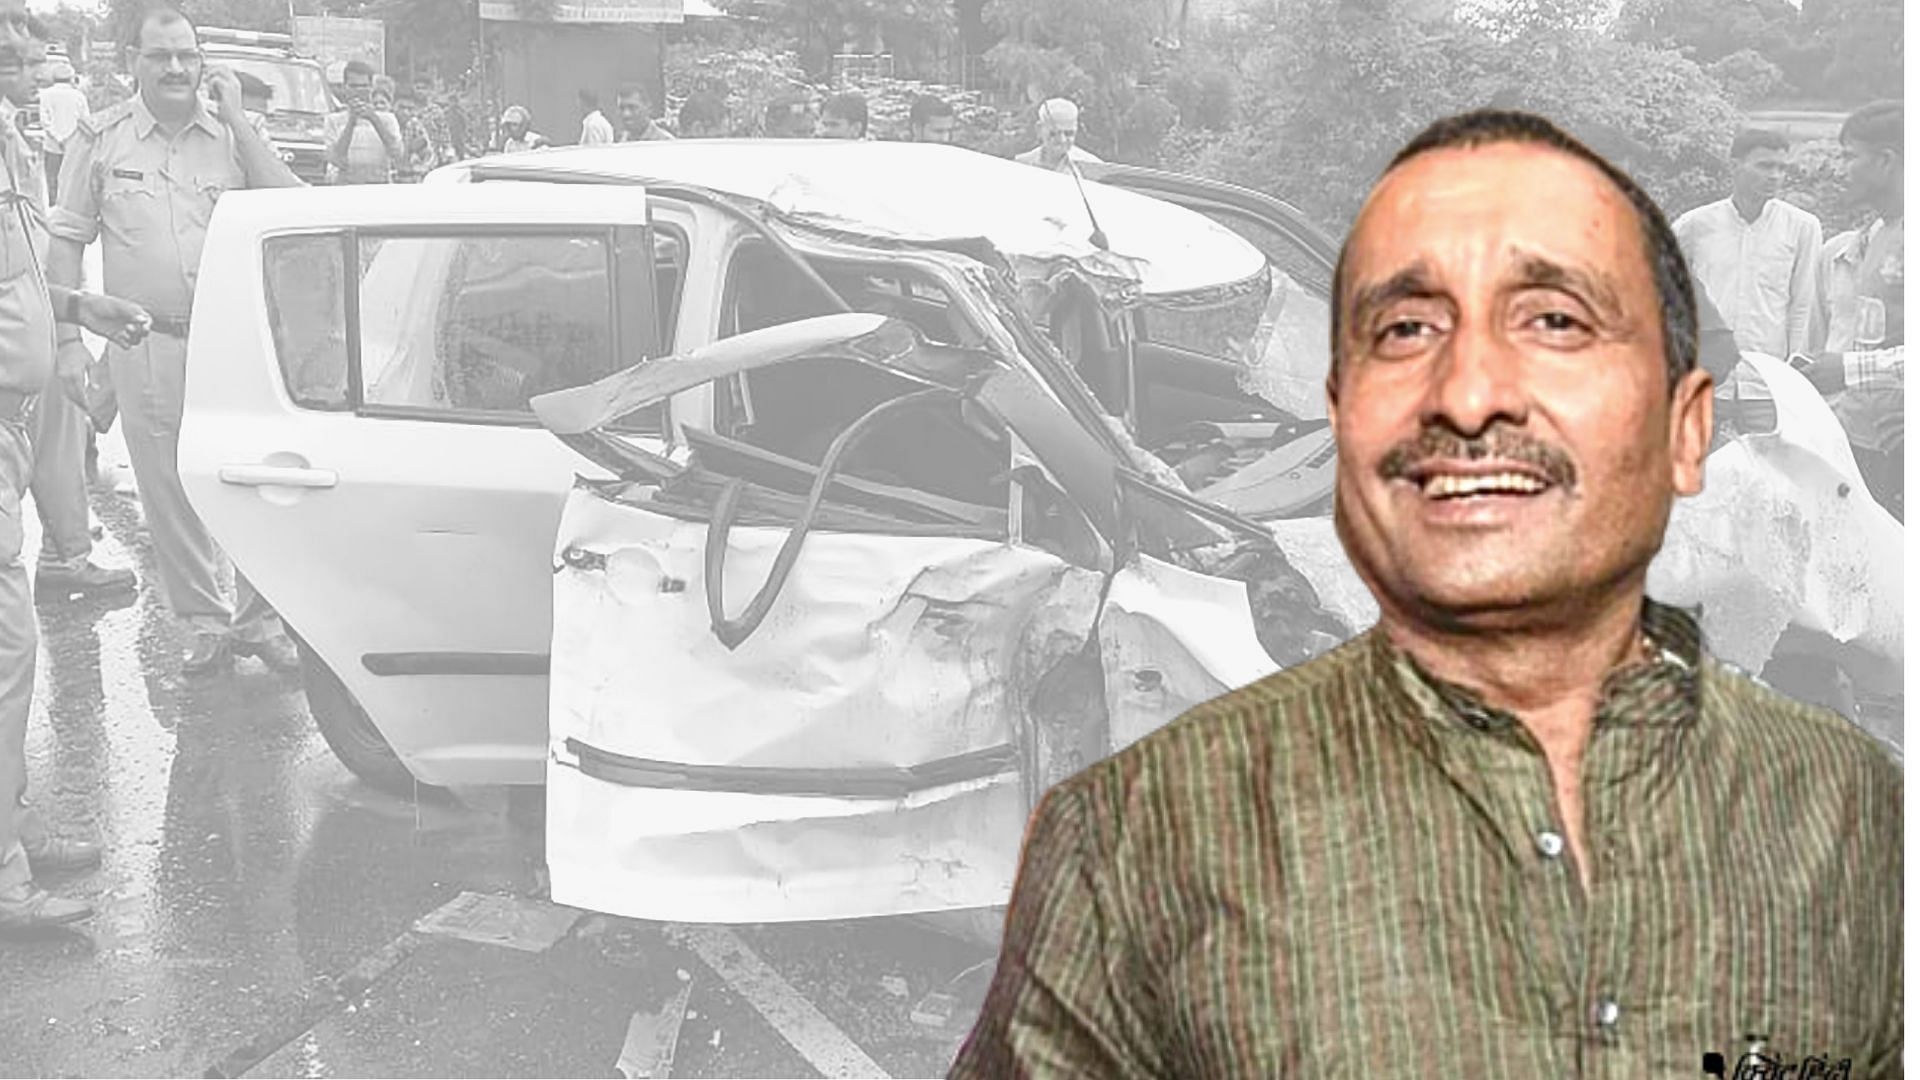 A speeding truck hit a car carrying the Unnao rape case survivor, critically injuring her and killing two of her relatives.